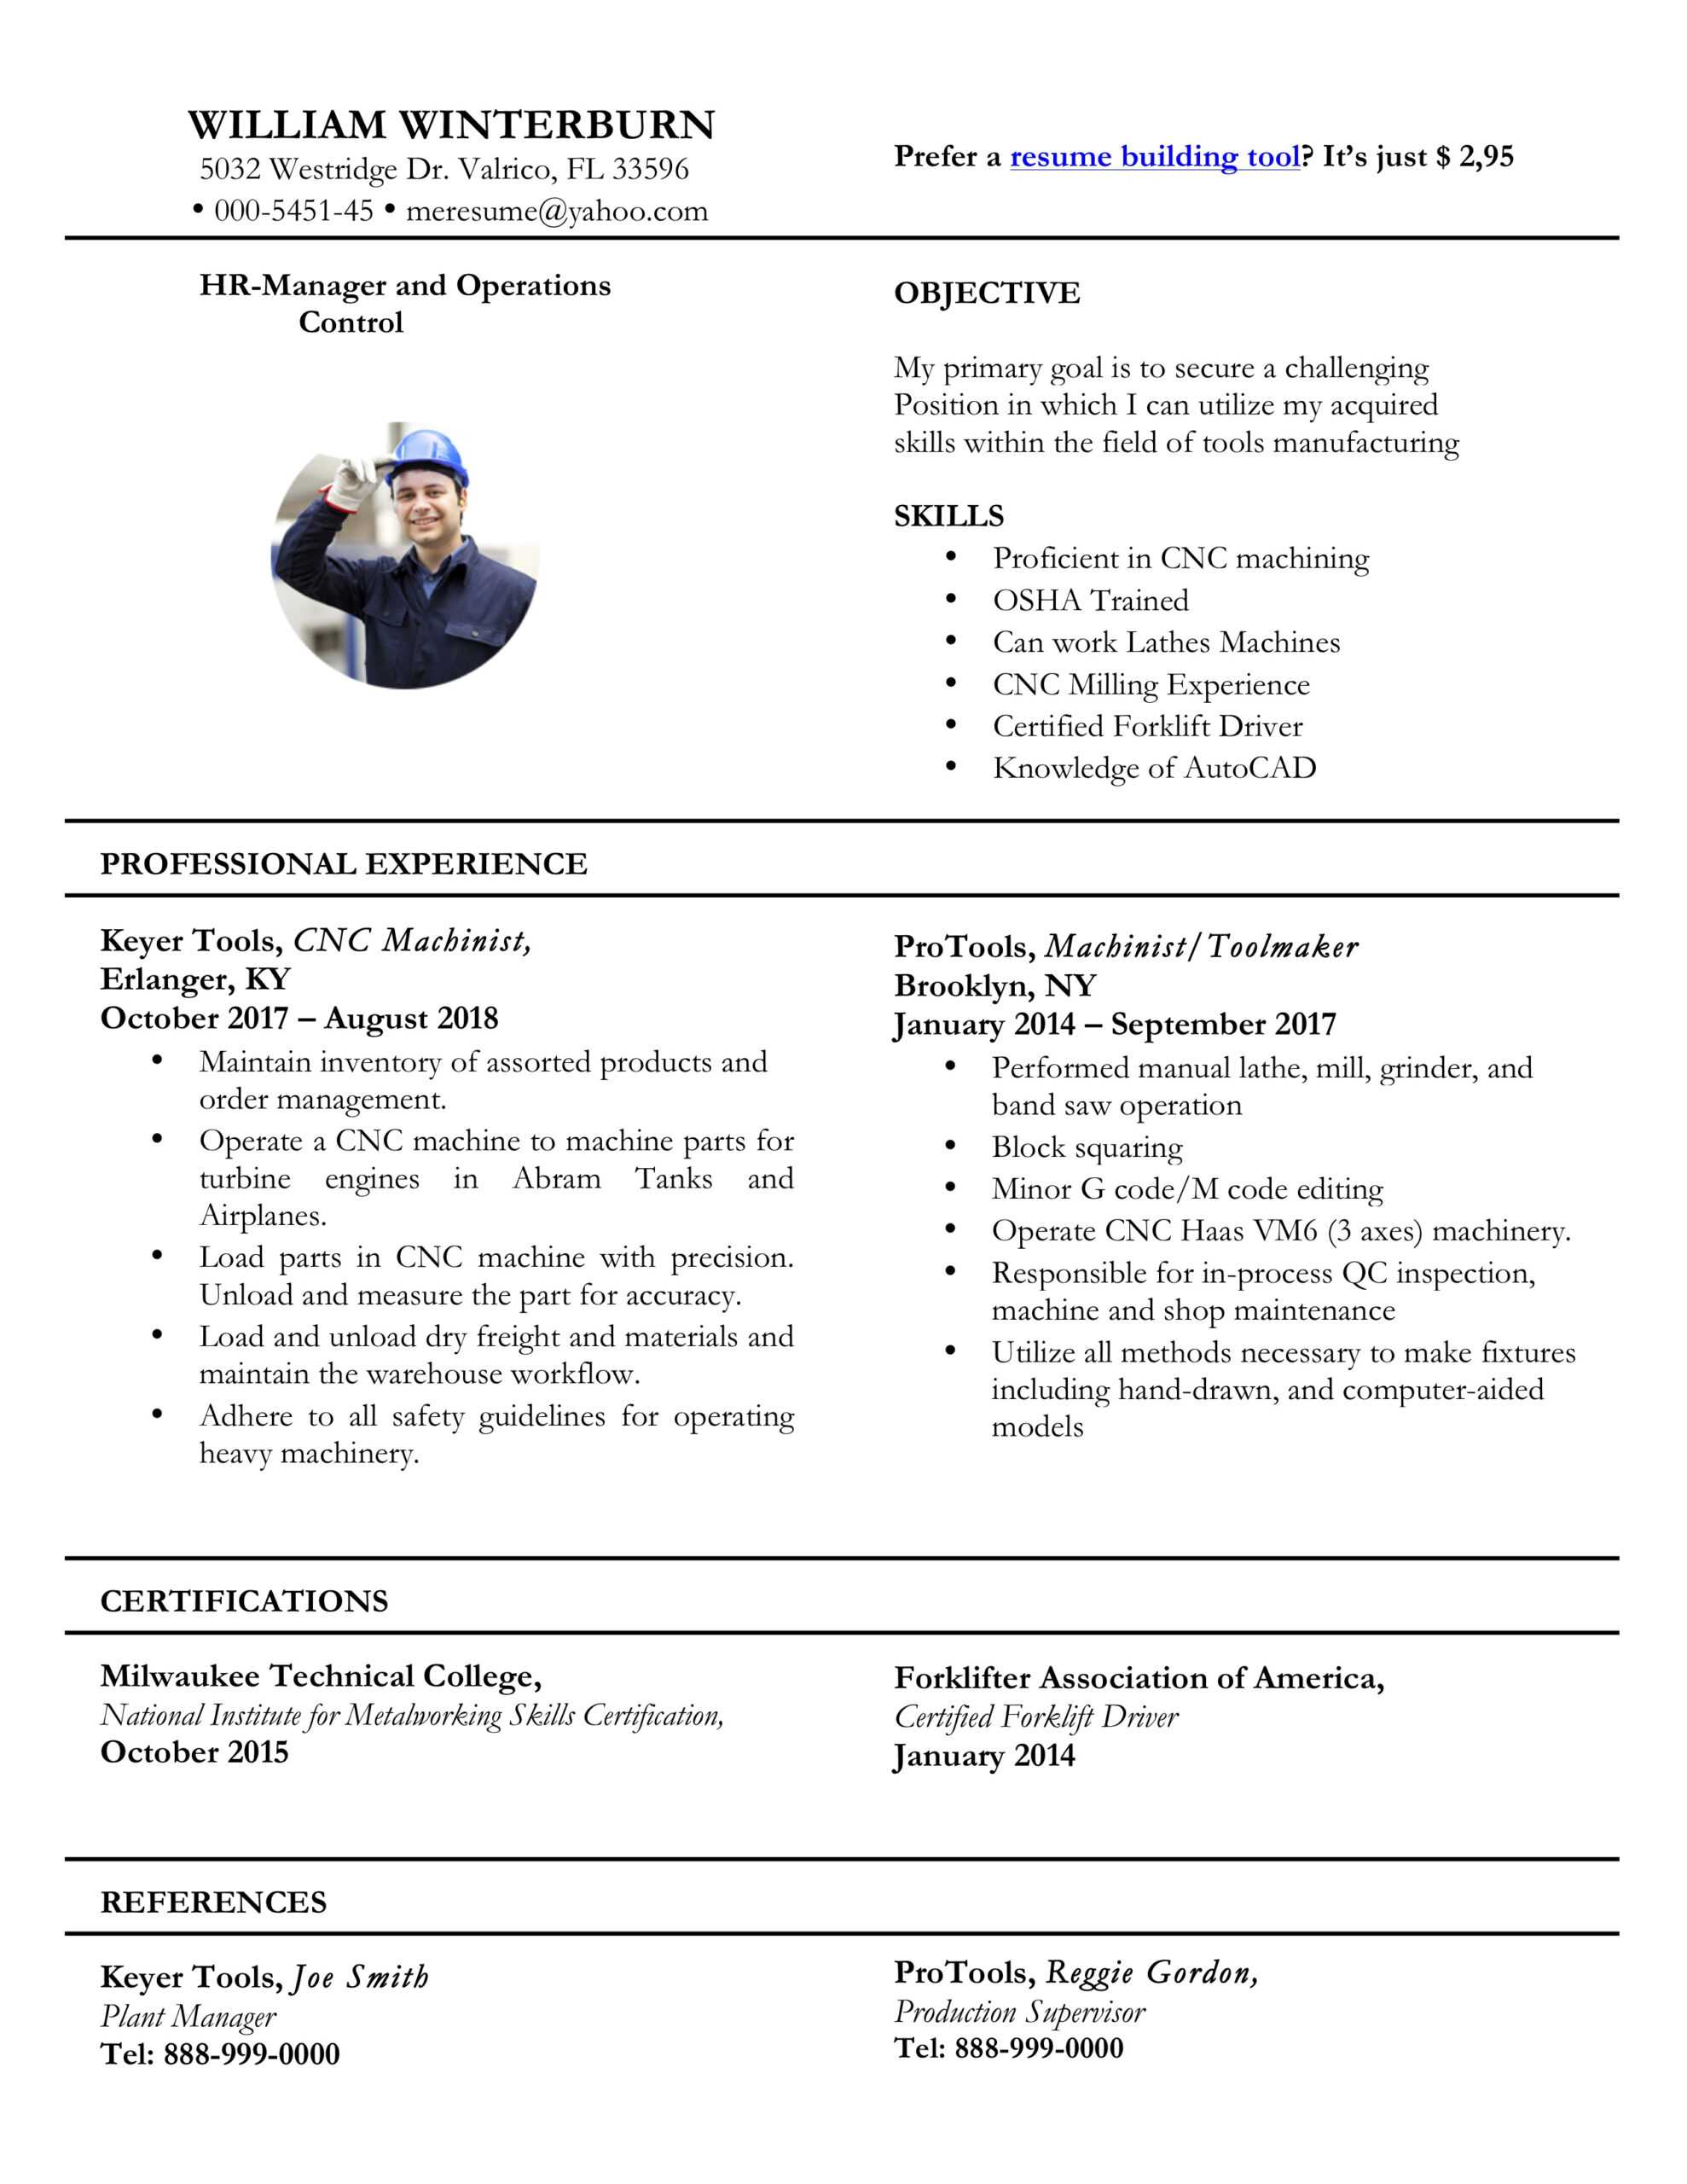 Resume Templates [2020] | Pdf And Word | Free Downloads + Inside Microsoft Word Resumes Templates